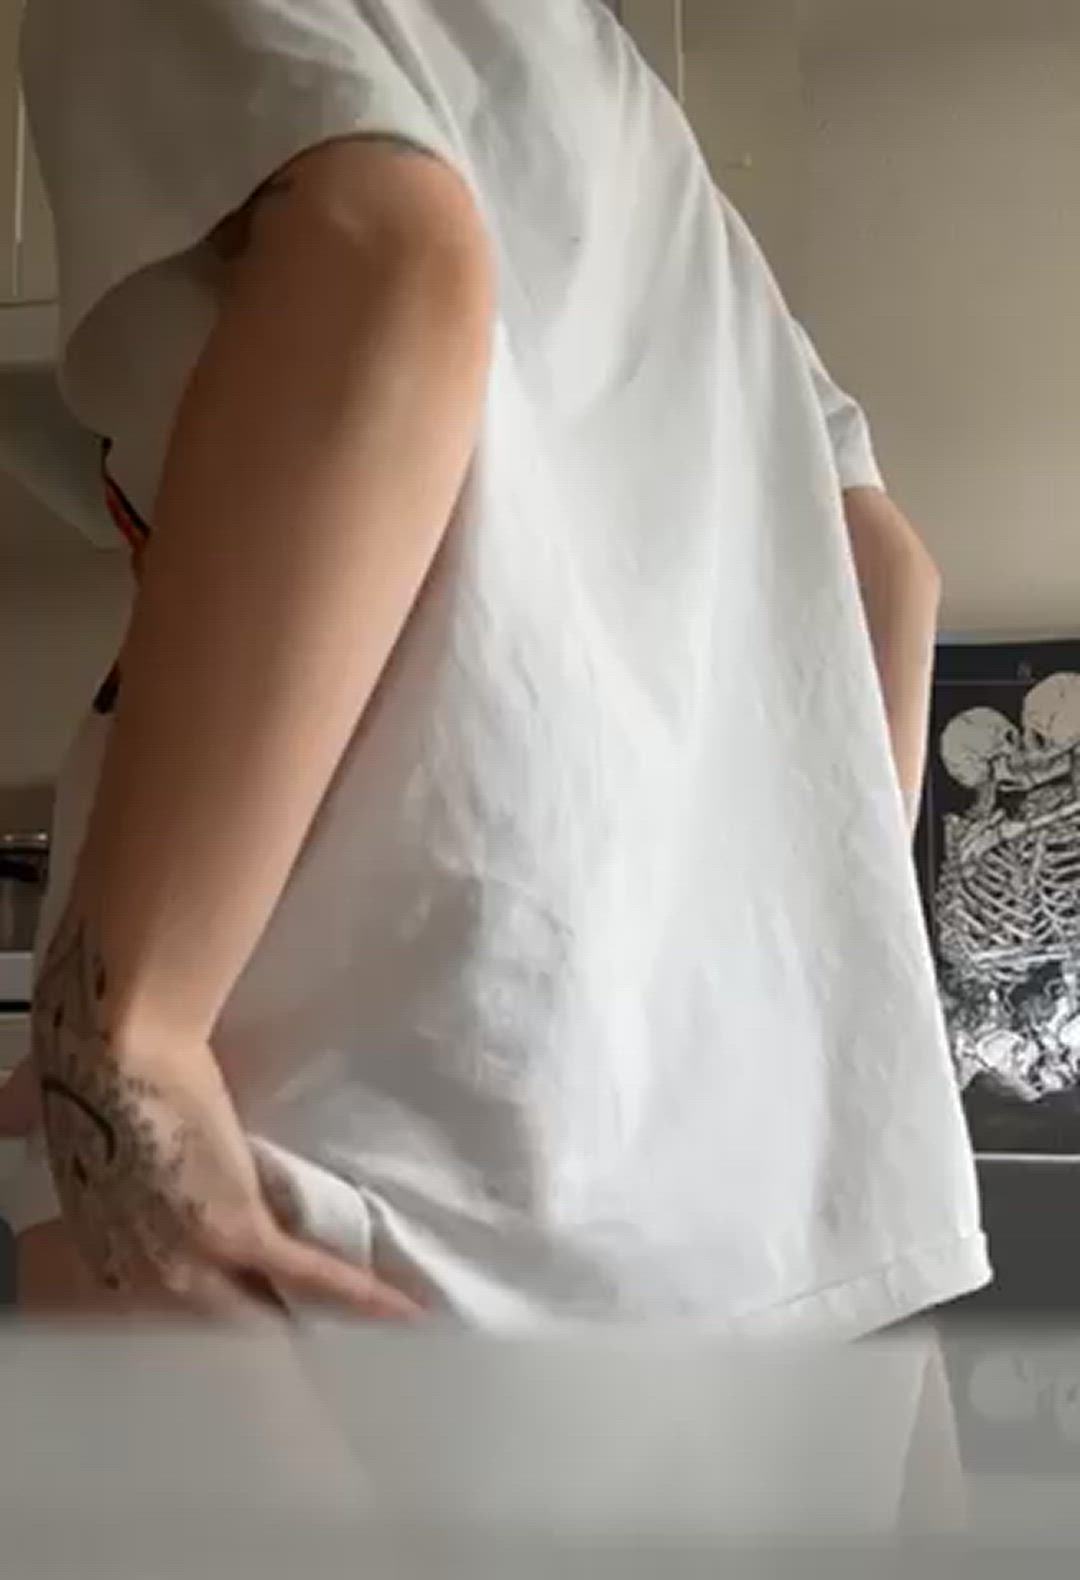 Ass porn video with onlyfans model honeypotx <strong>@honey_potx</strong>